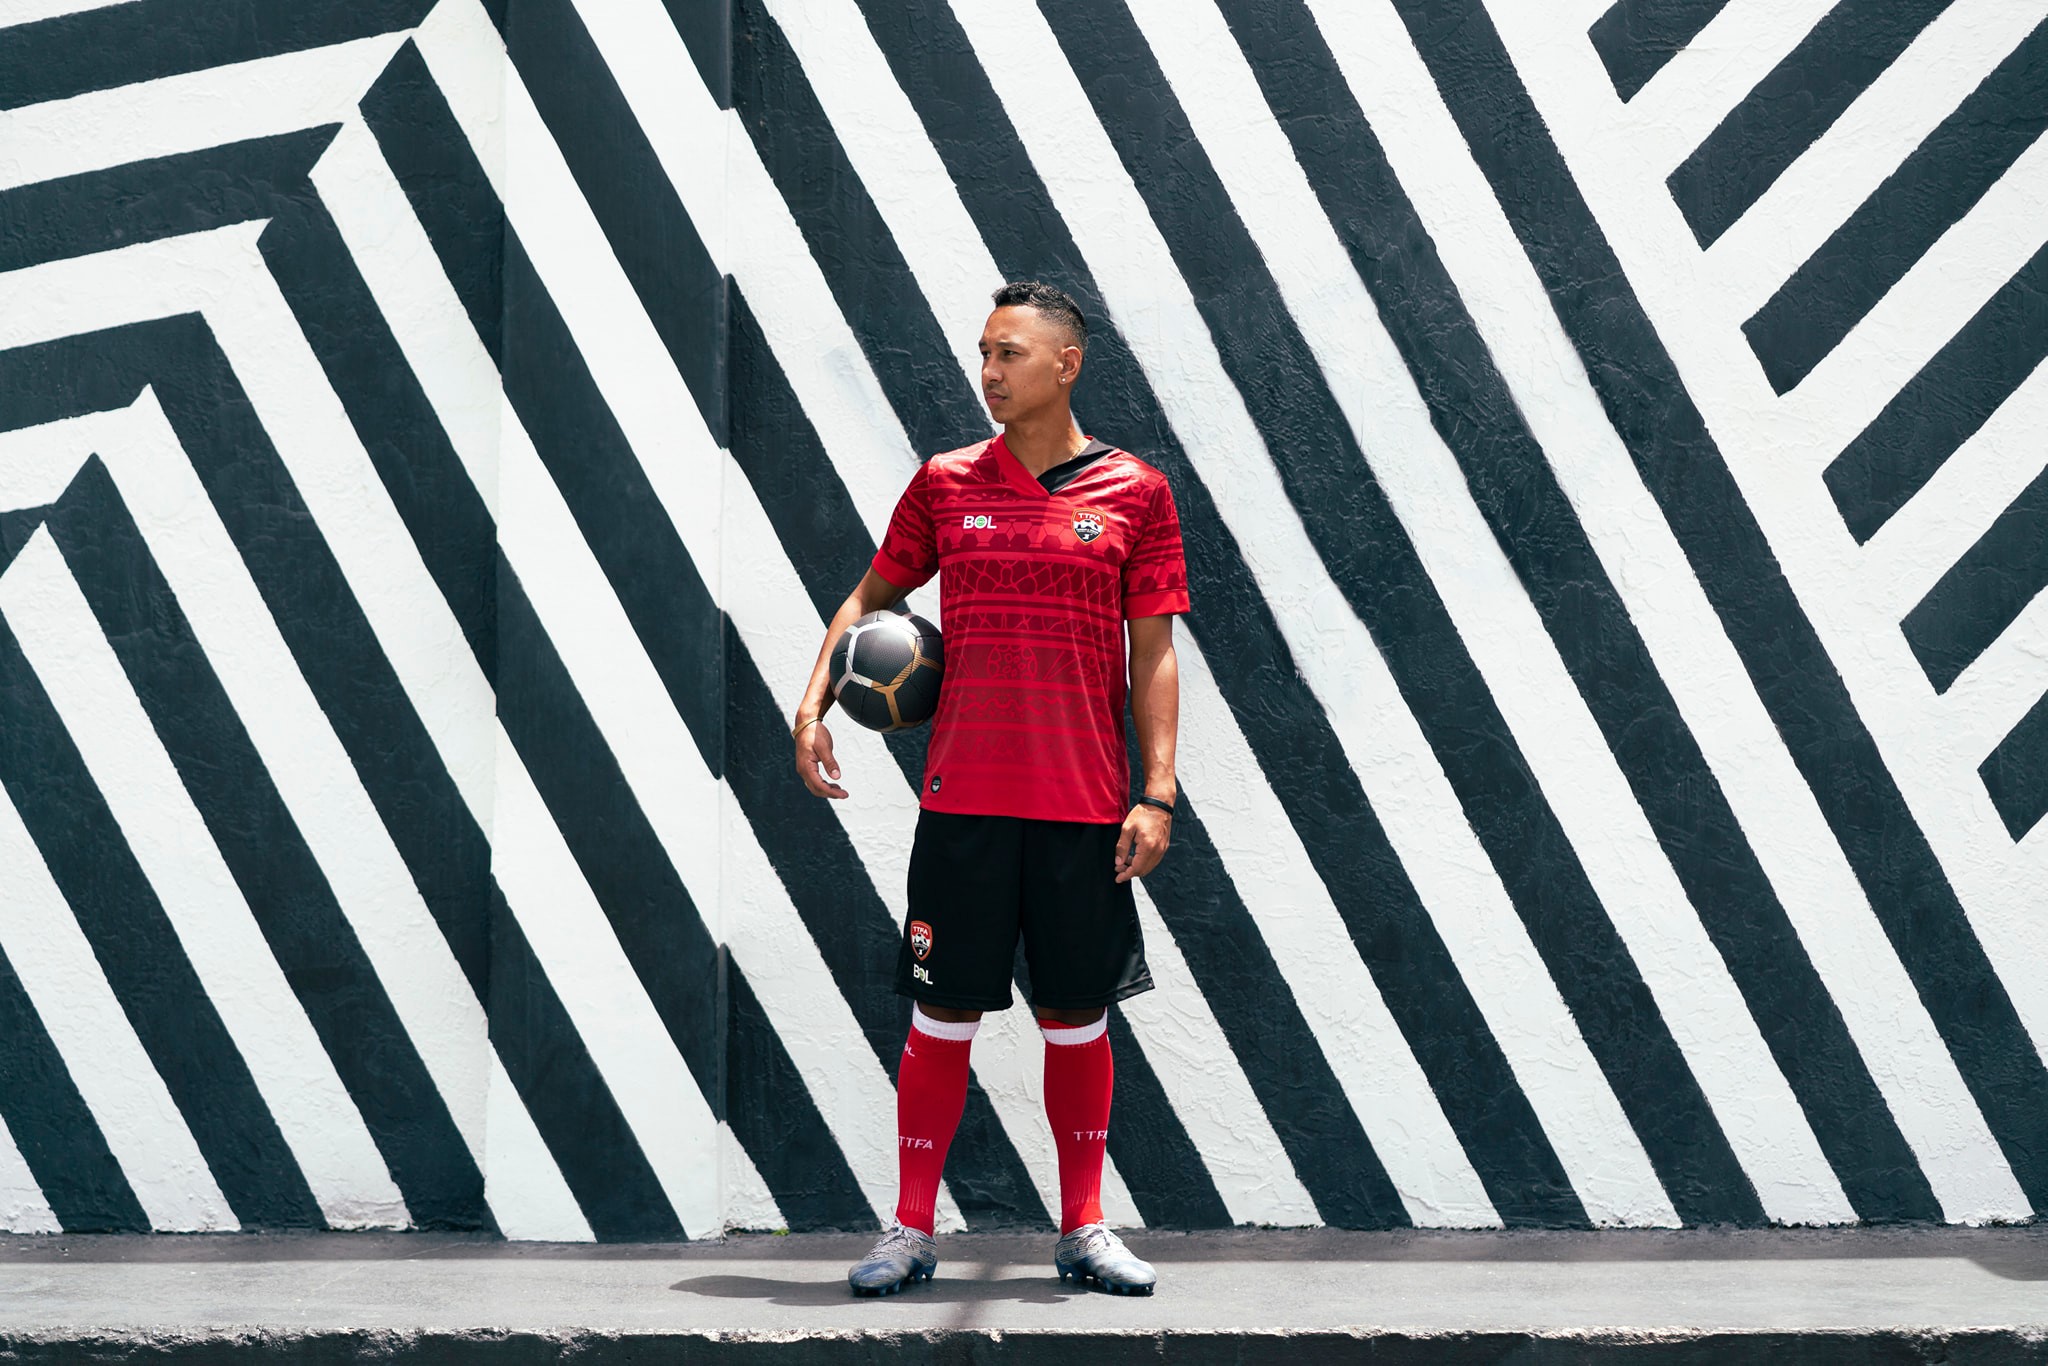 BOL unveils “steel tribe” kit designs for T&T’s National Football Team